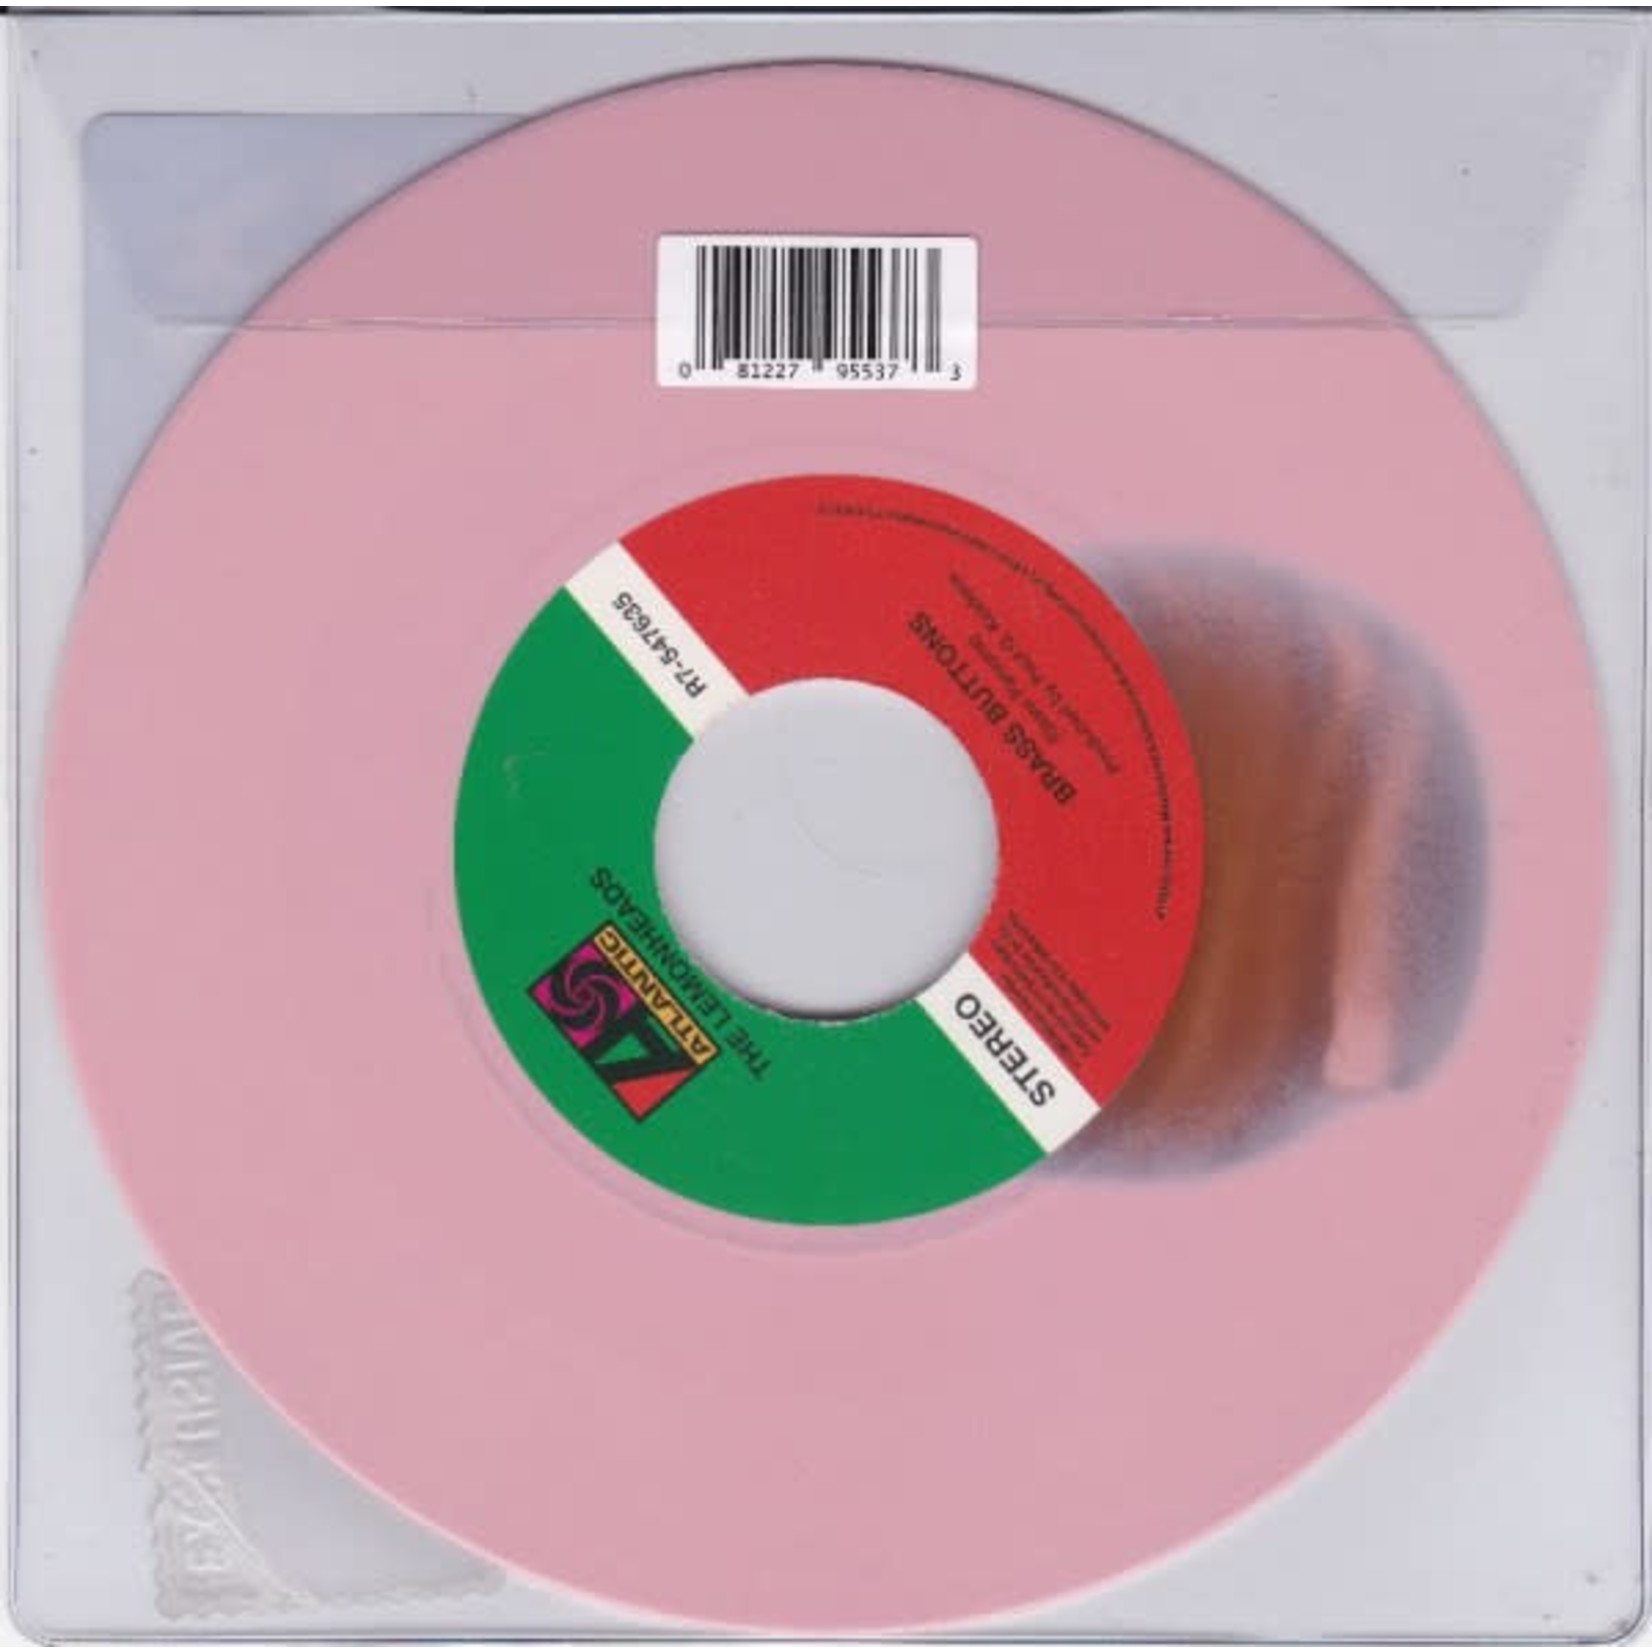 Record Store Day 2008-2023 Gram Parsons / Lemonheads - Brass Buttons (7") [Pink]